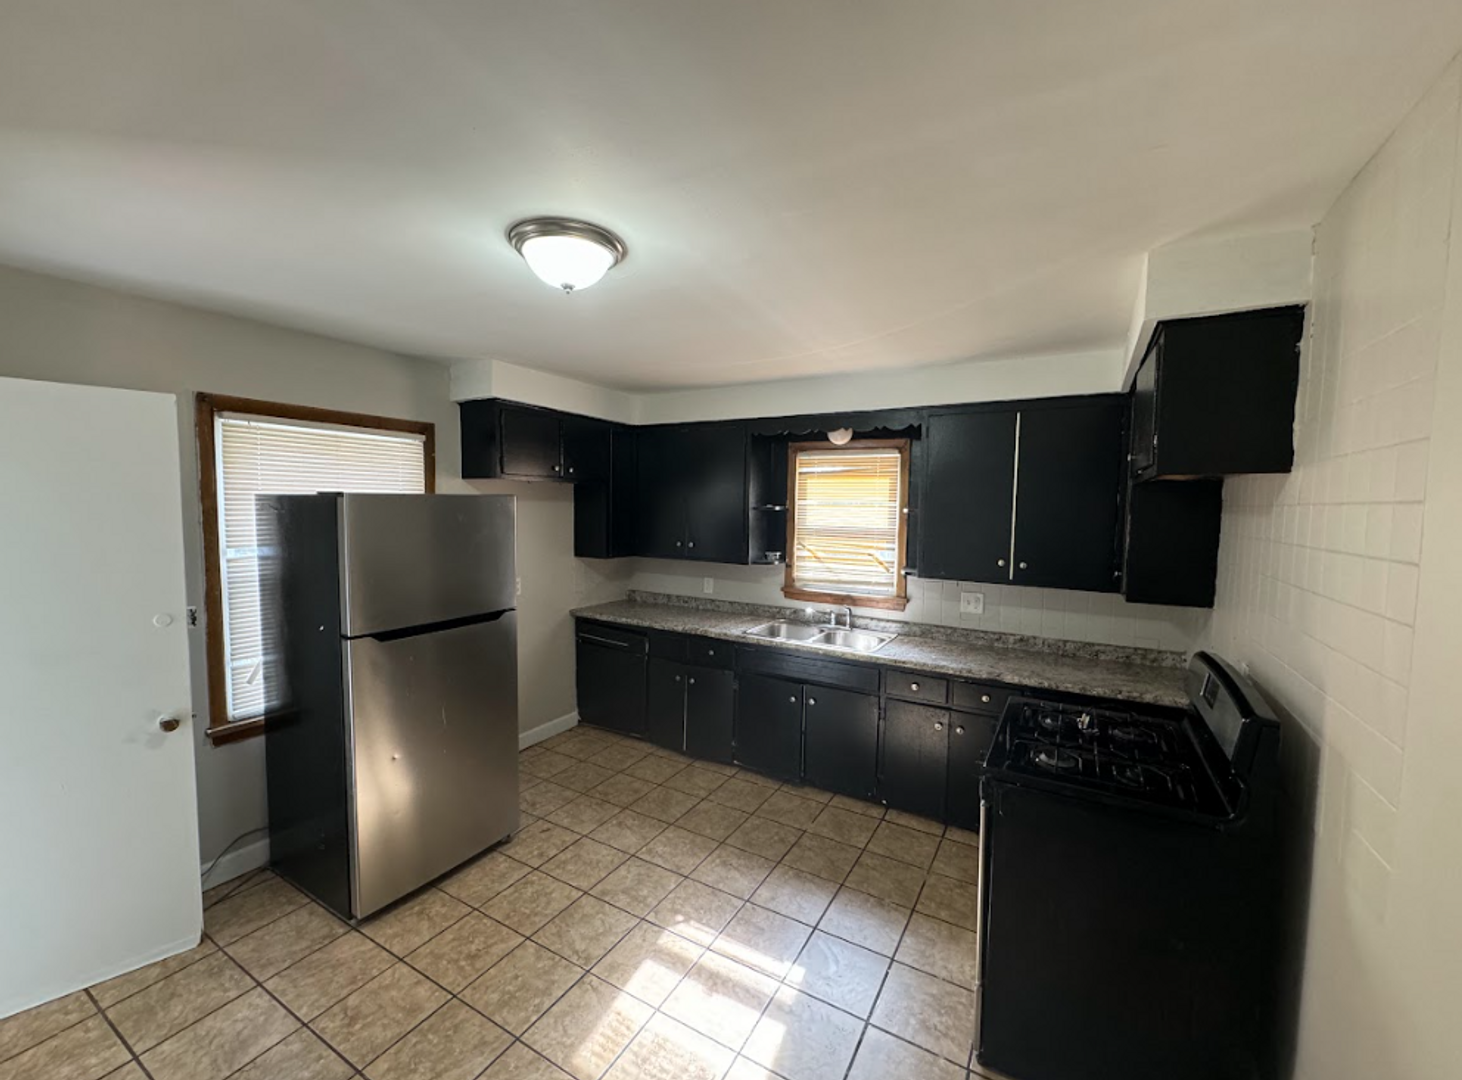 Single Family Home 3 beds 1 bath FOR RENT!